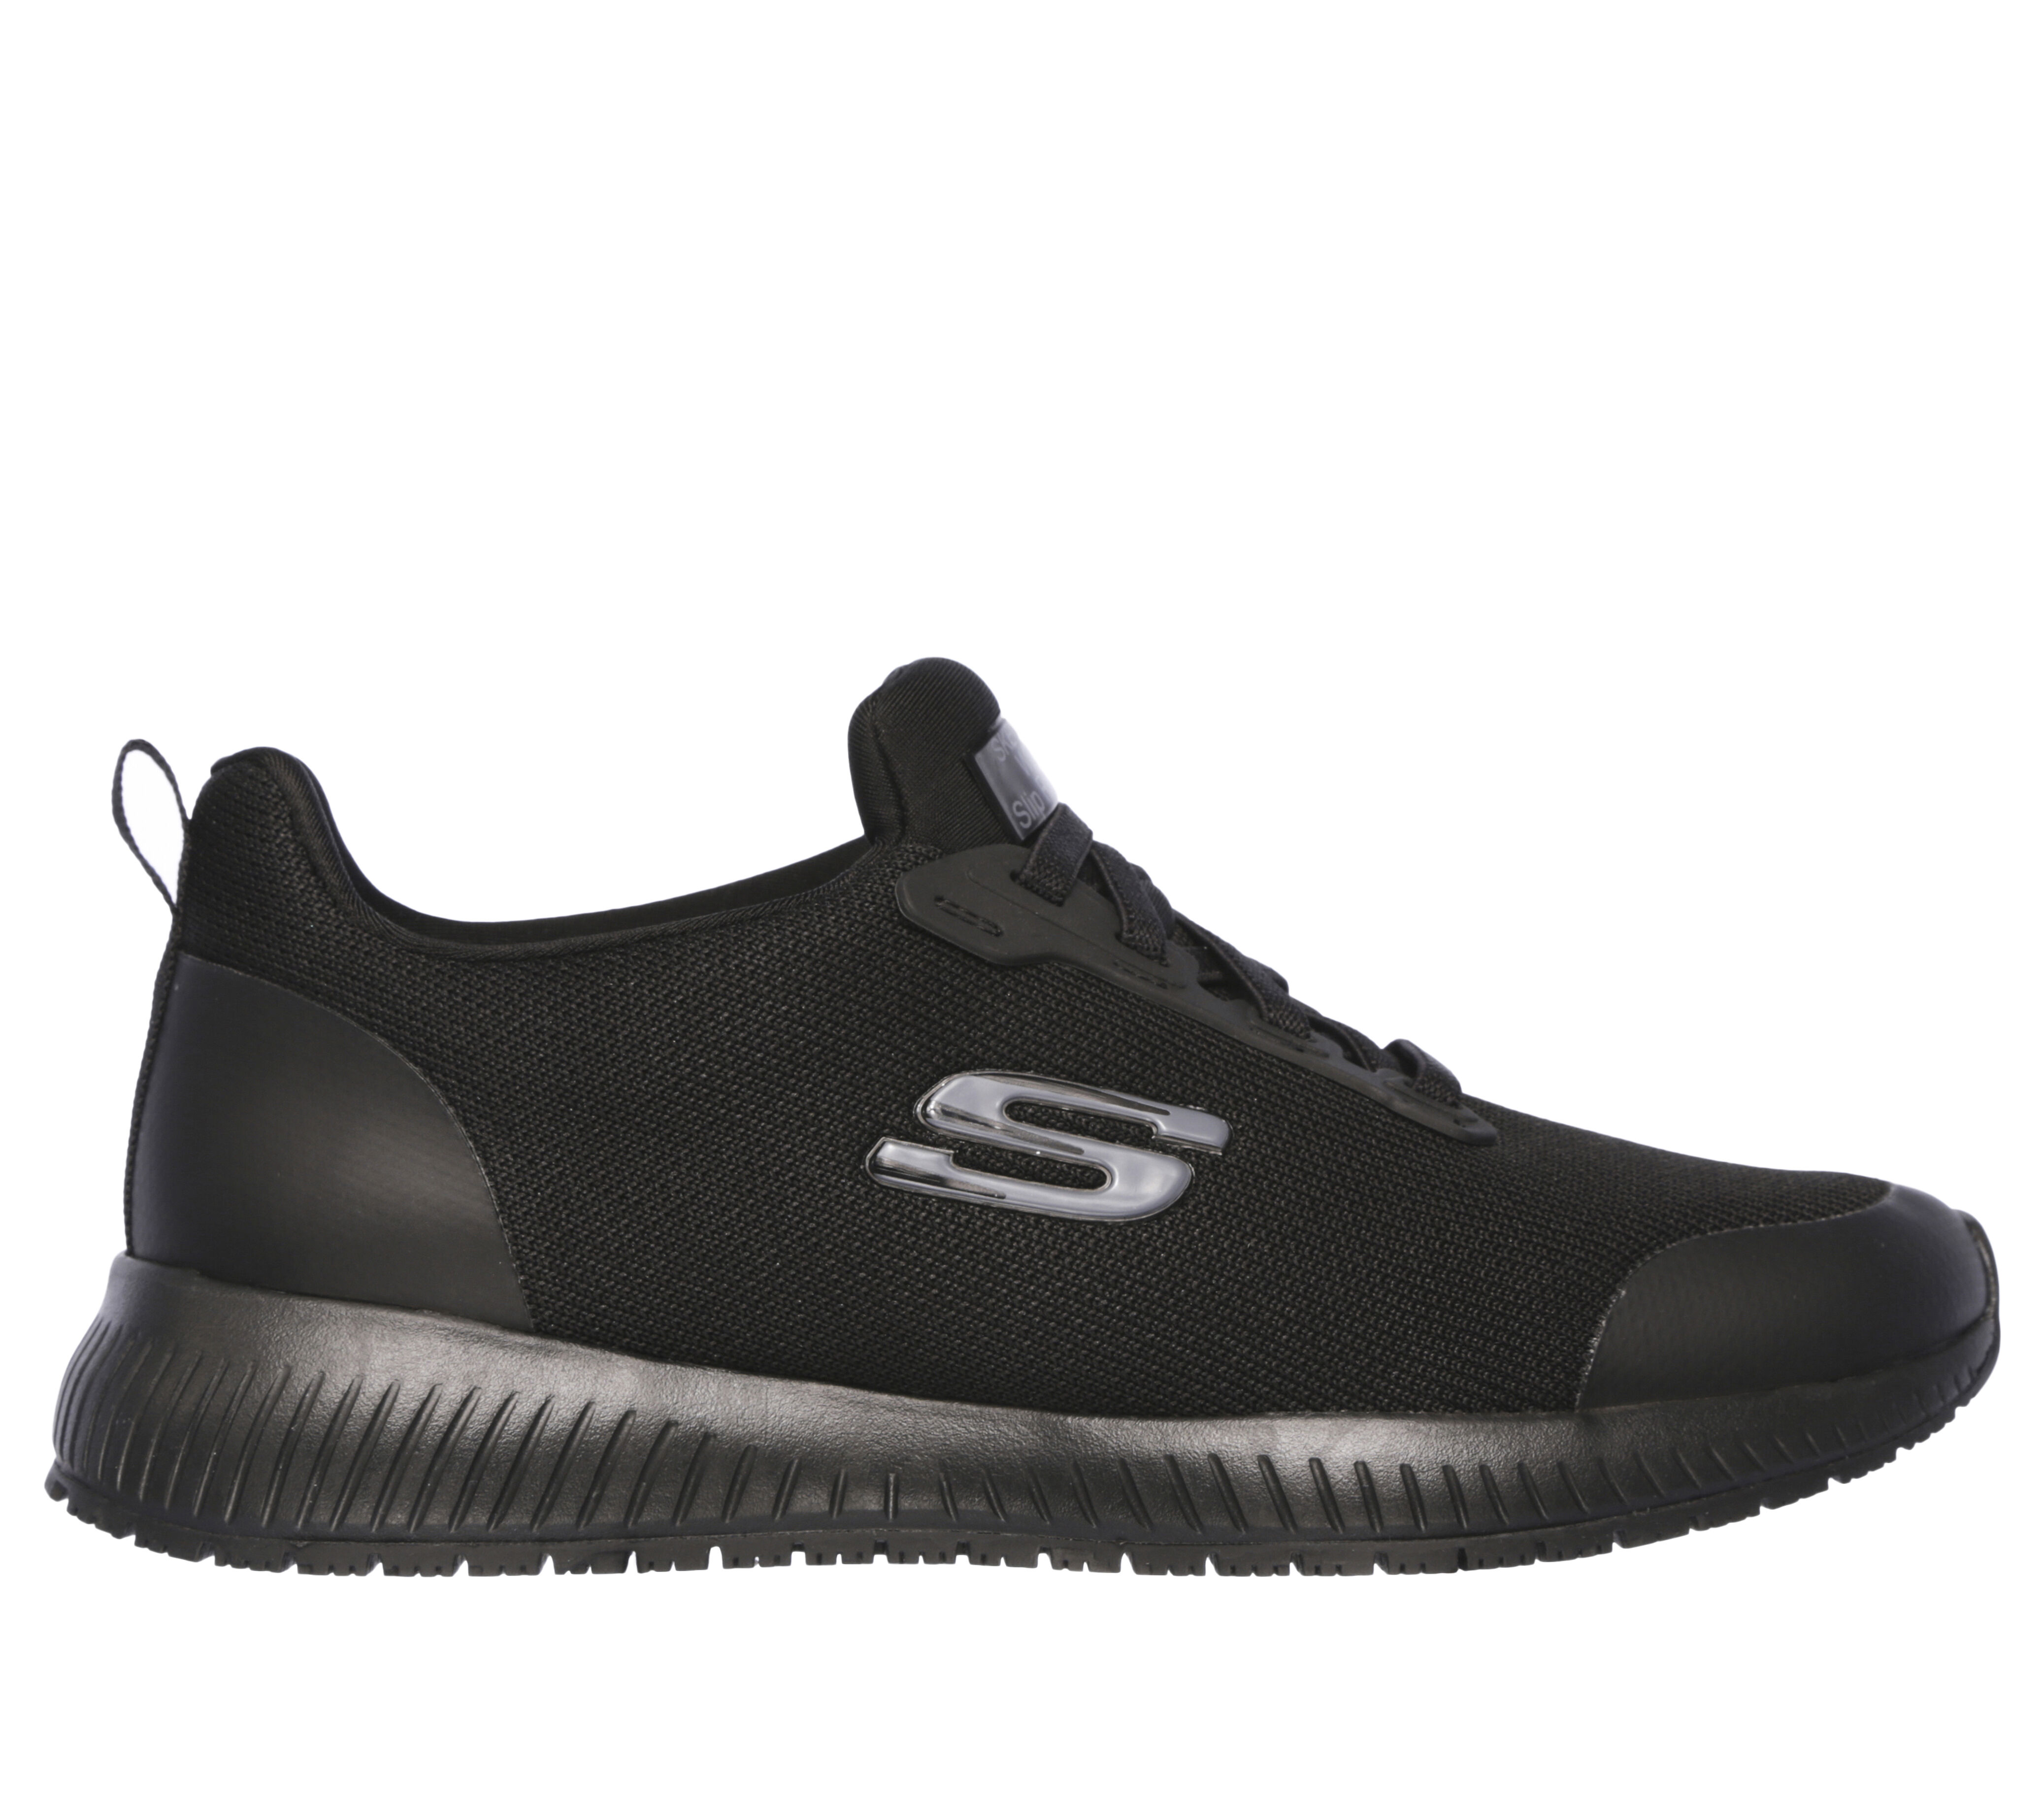 skechers work force shoes